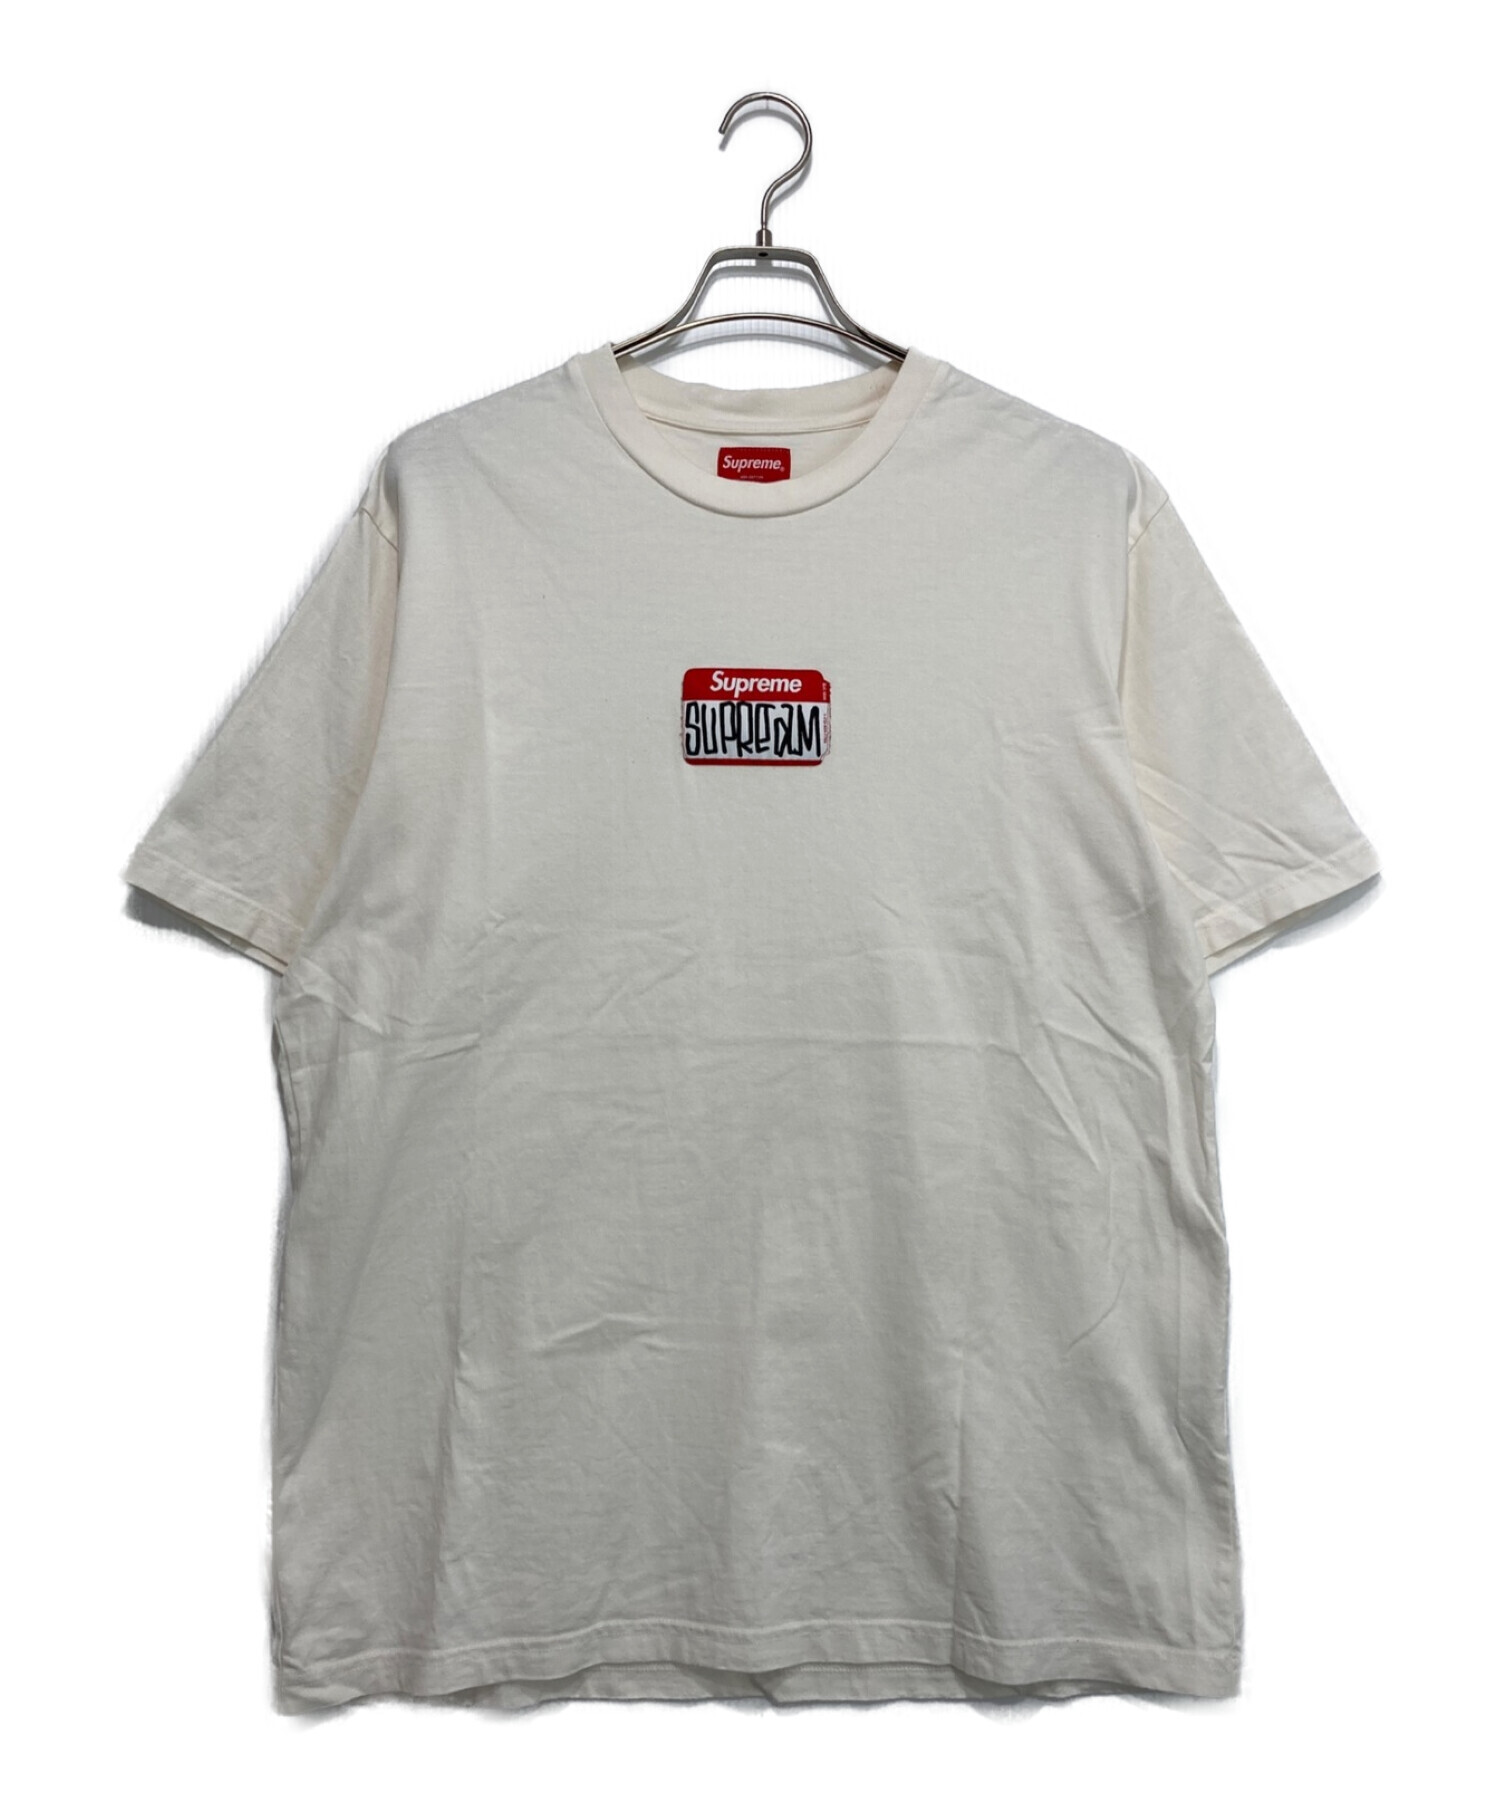 supreme Gonz Nametag S/S Tee